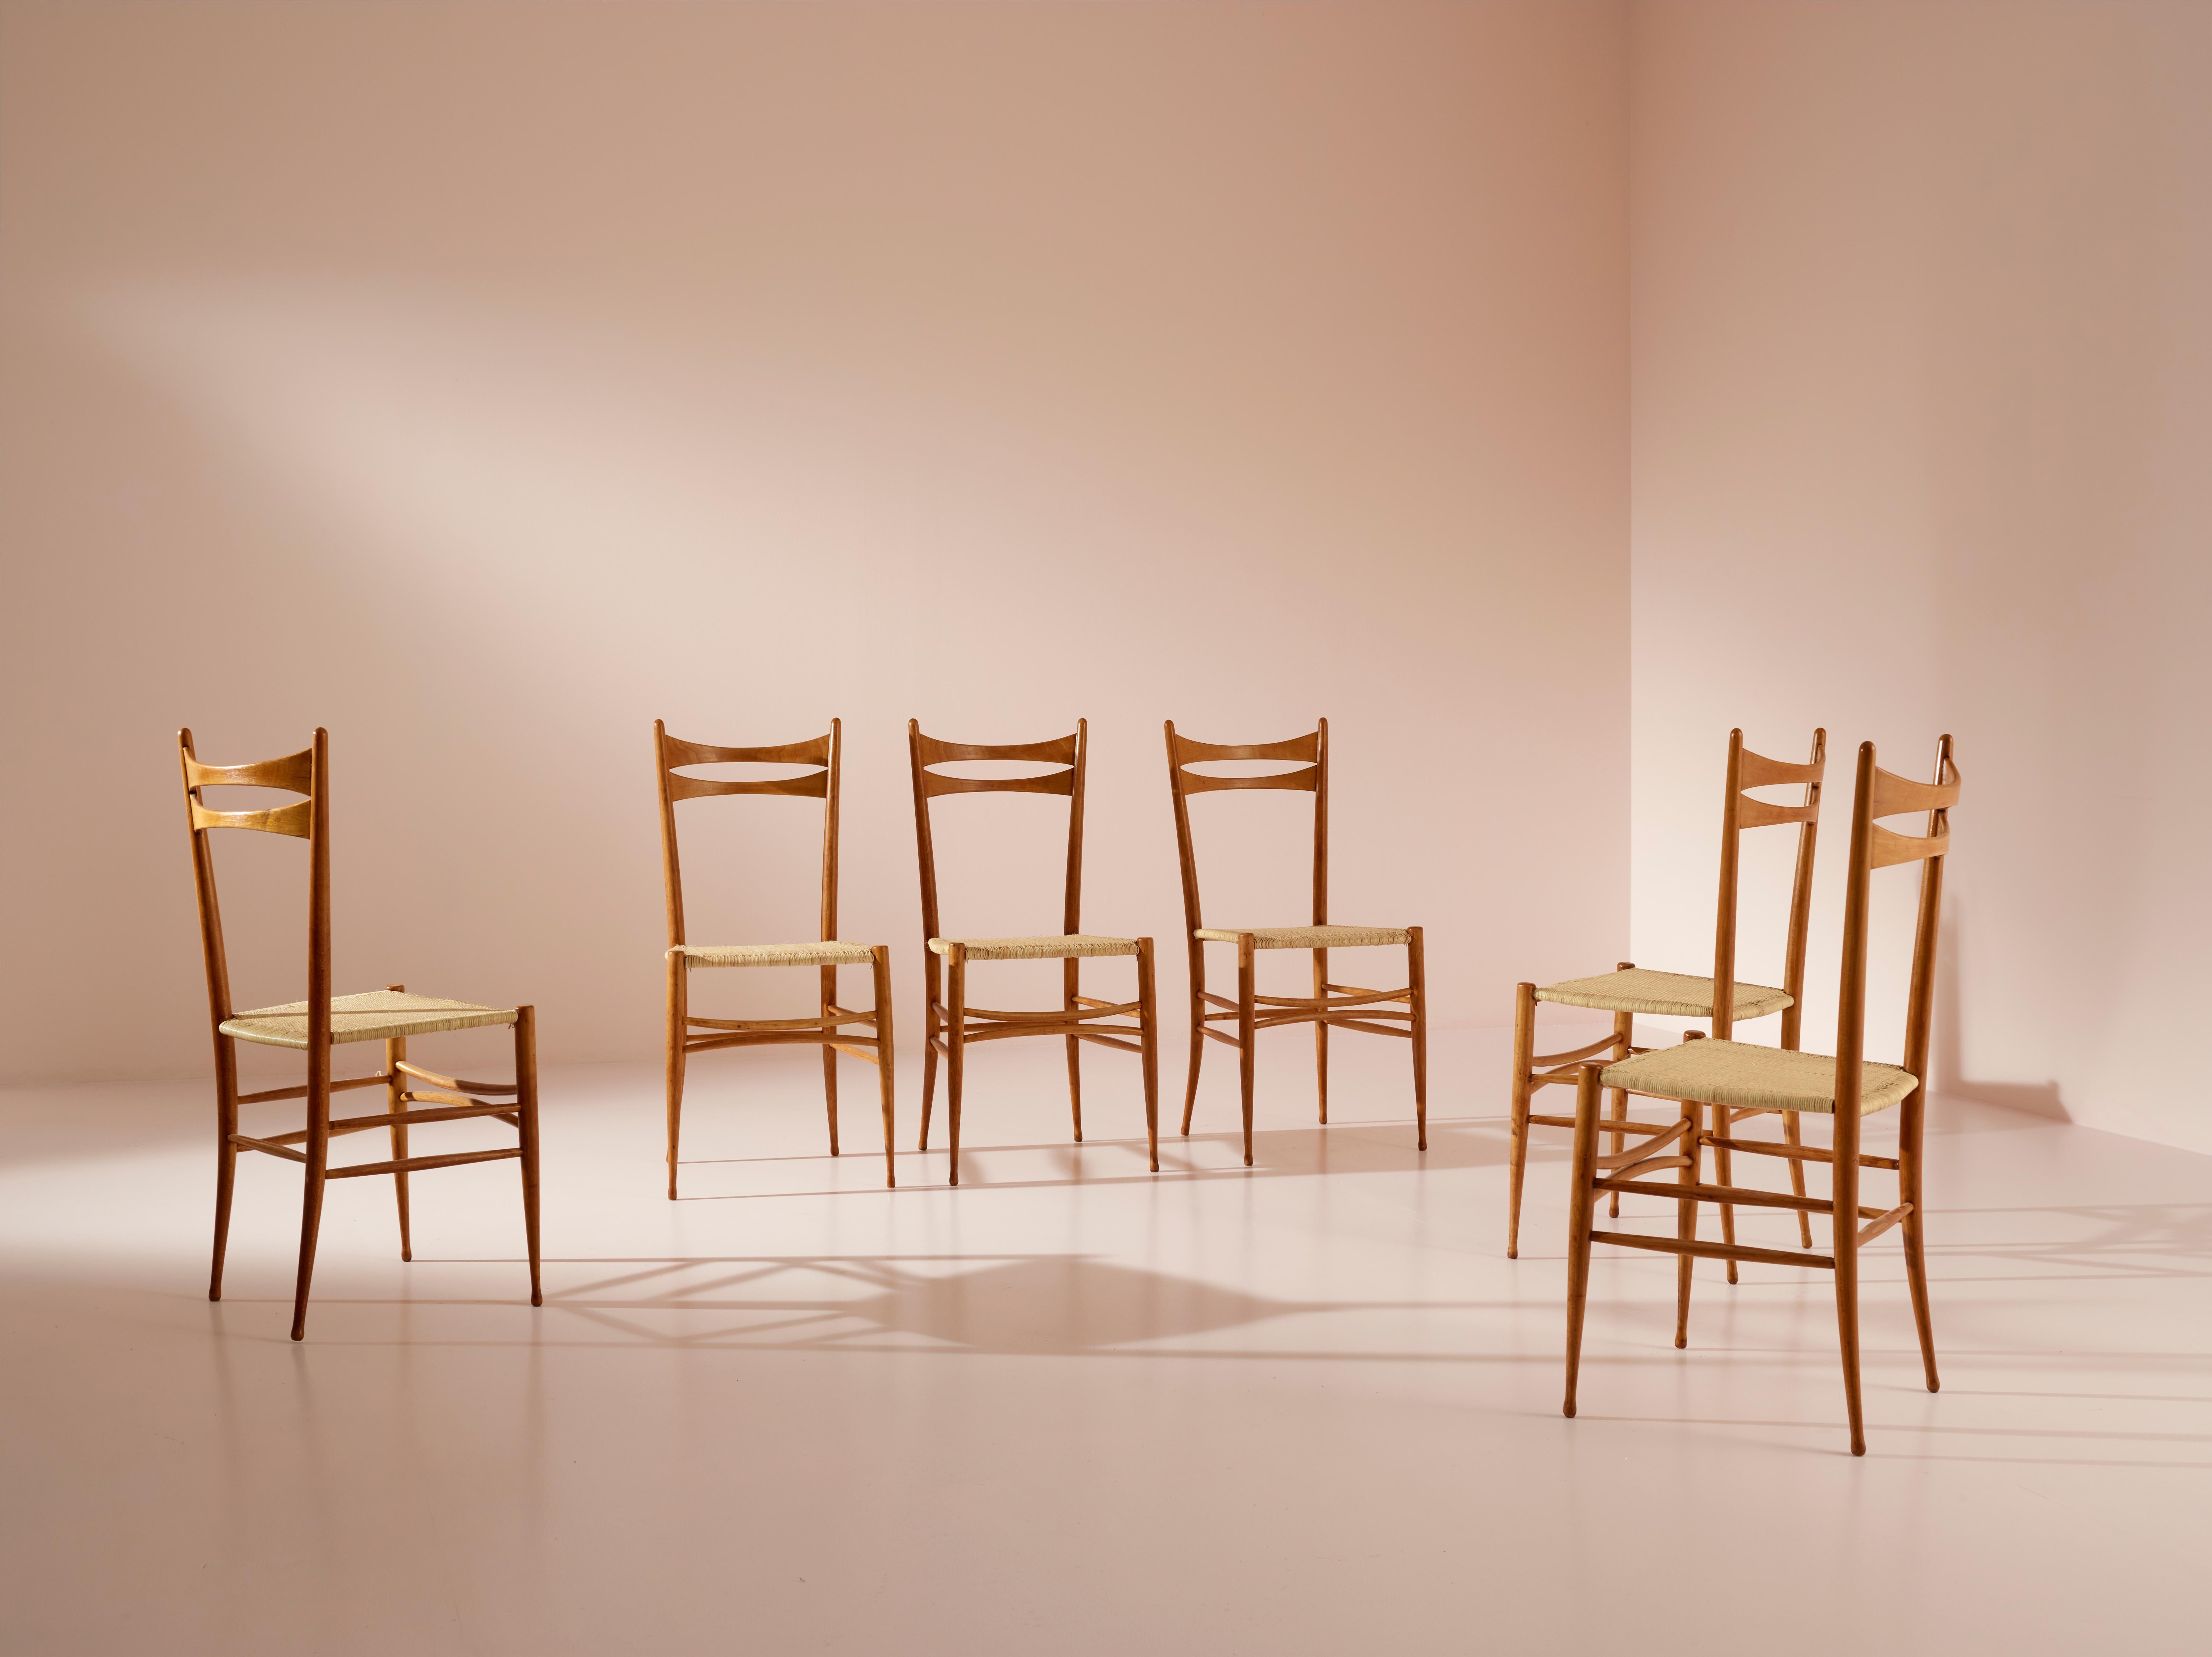 Emanuele Rambaldi set of six beech and straw chairs by Chiappe, Chiavari, 1940s For Sale 3